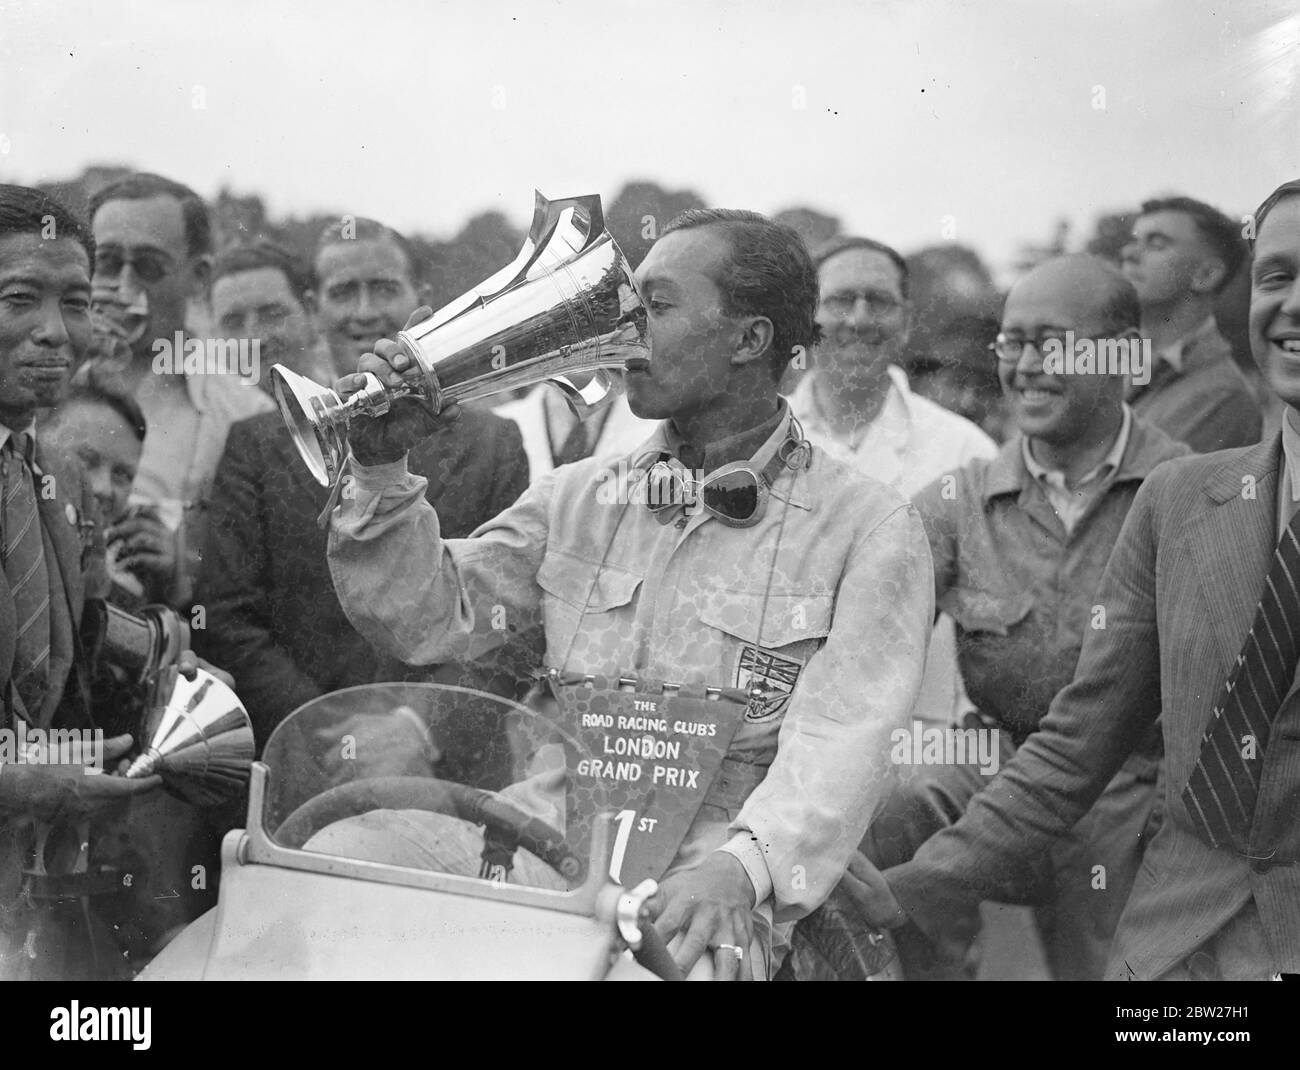 Prince Birabongse of Siam [Prince Bira of Siam / Thailand], driving an ERA [English Racing Automobiles] won the first London Grand Prix on the new Crystal Palace road racing circuit. I. F. Cornell (ERA) was second and P. Maclure (Riley) was third. Prince Birabongse drinking out of the Cup after his victory. 17 July 1937 Stock Photo